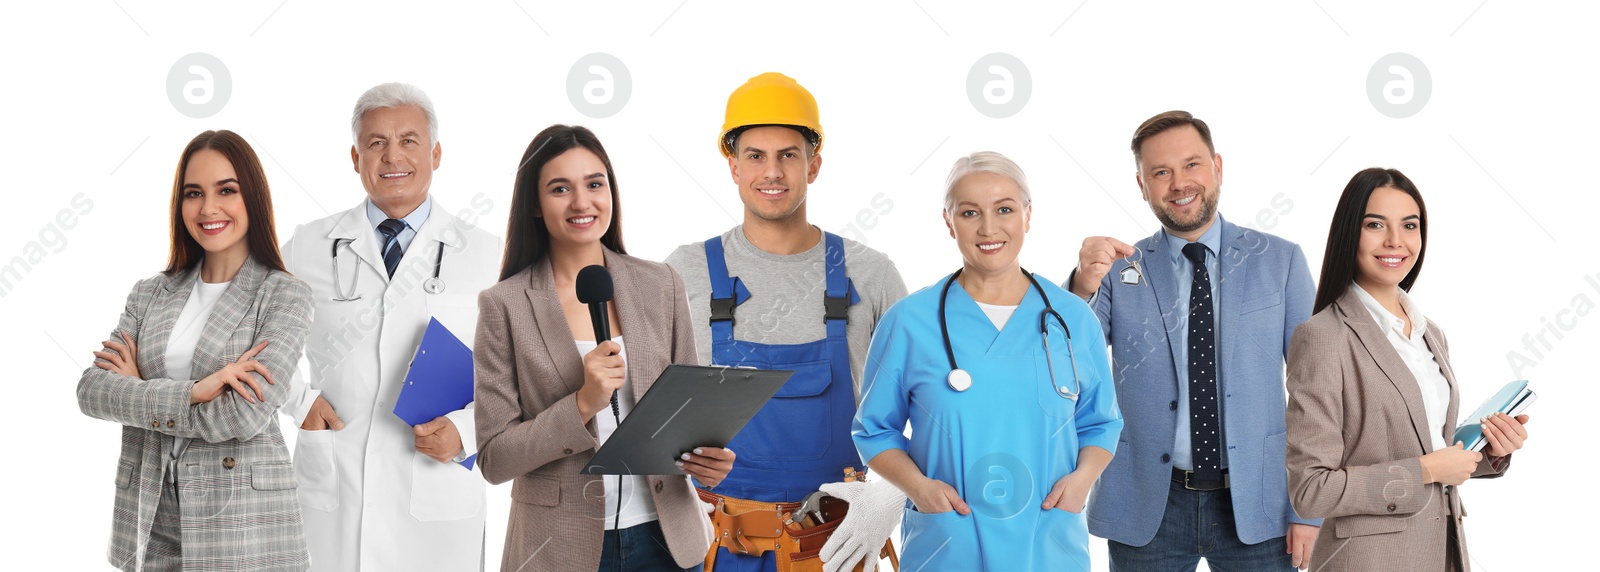 Image of Collage with people of different professions on white background. Banner design 